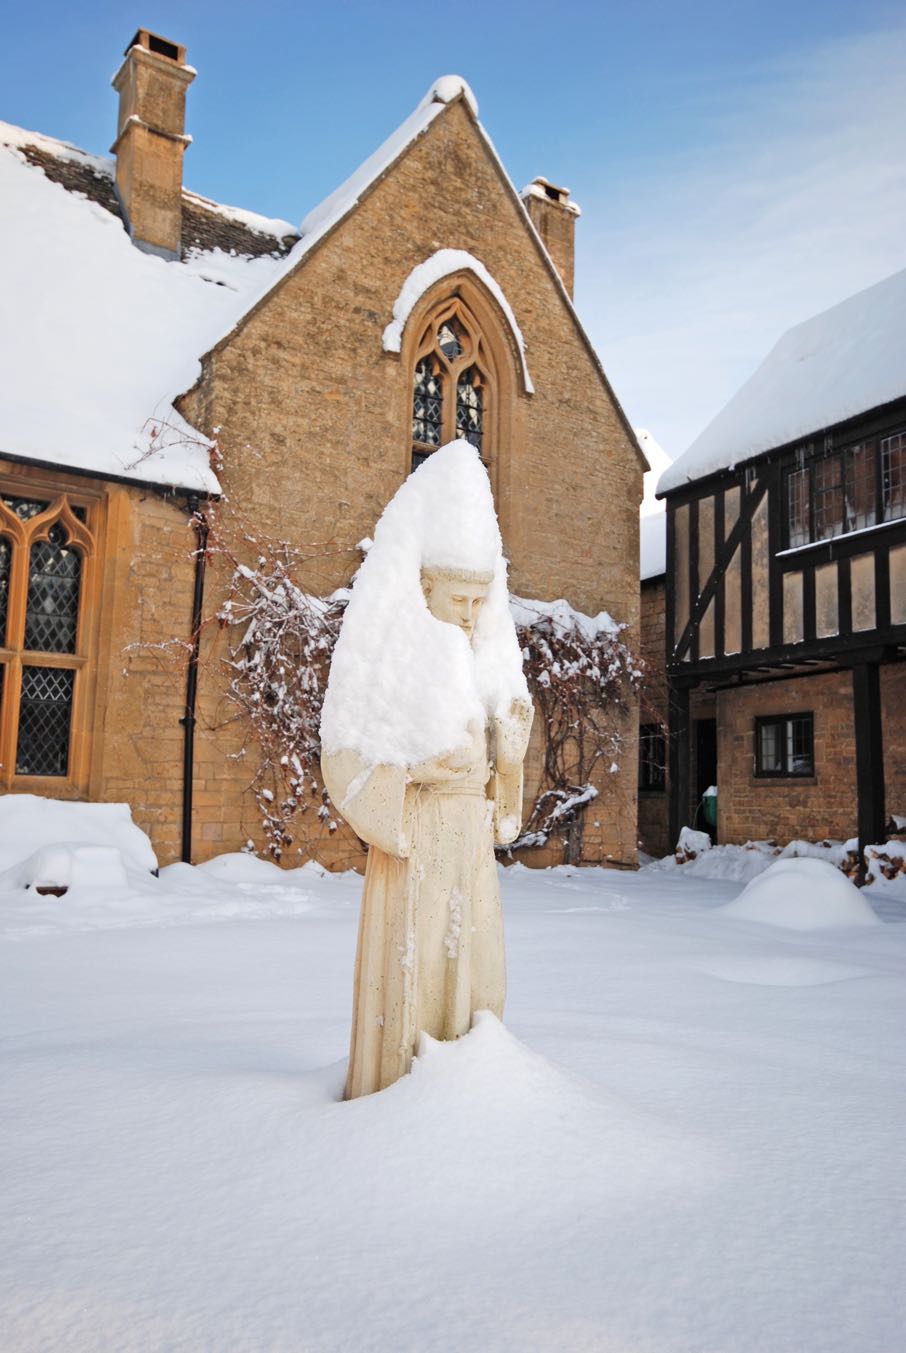 Abbots sculpture and courtyard covered in snow